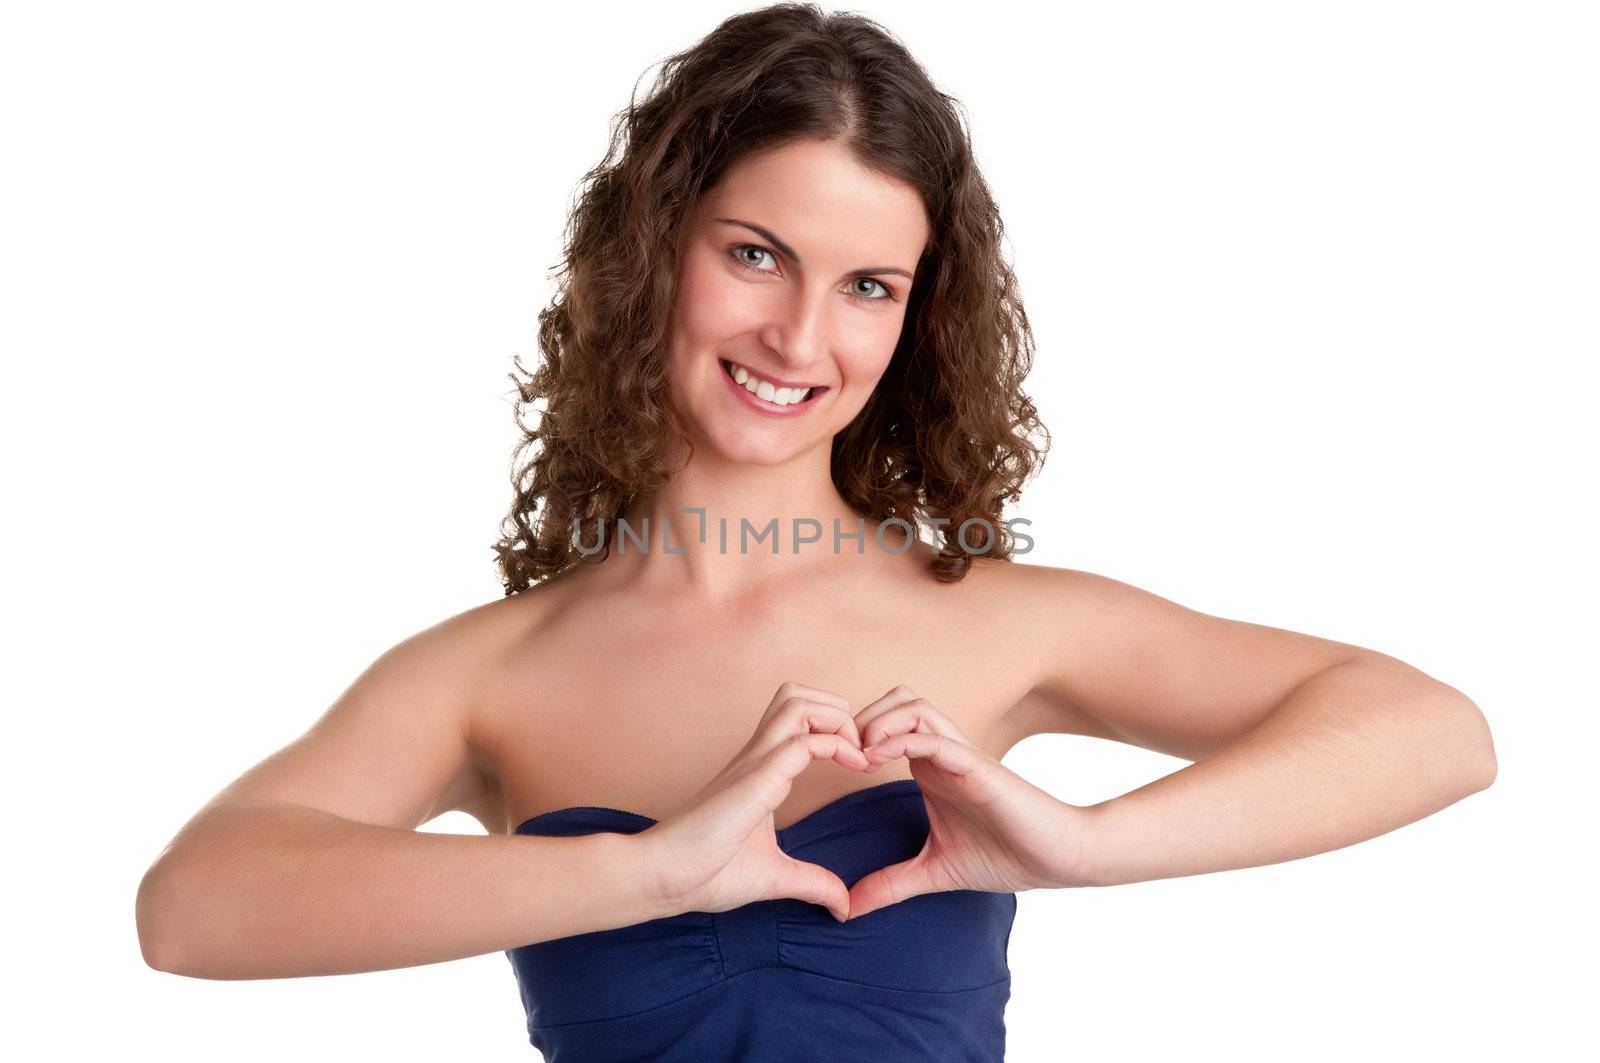 Woman making a heart symbol with her hands, isolated in a white background